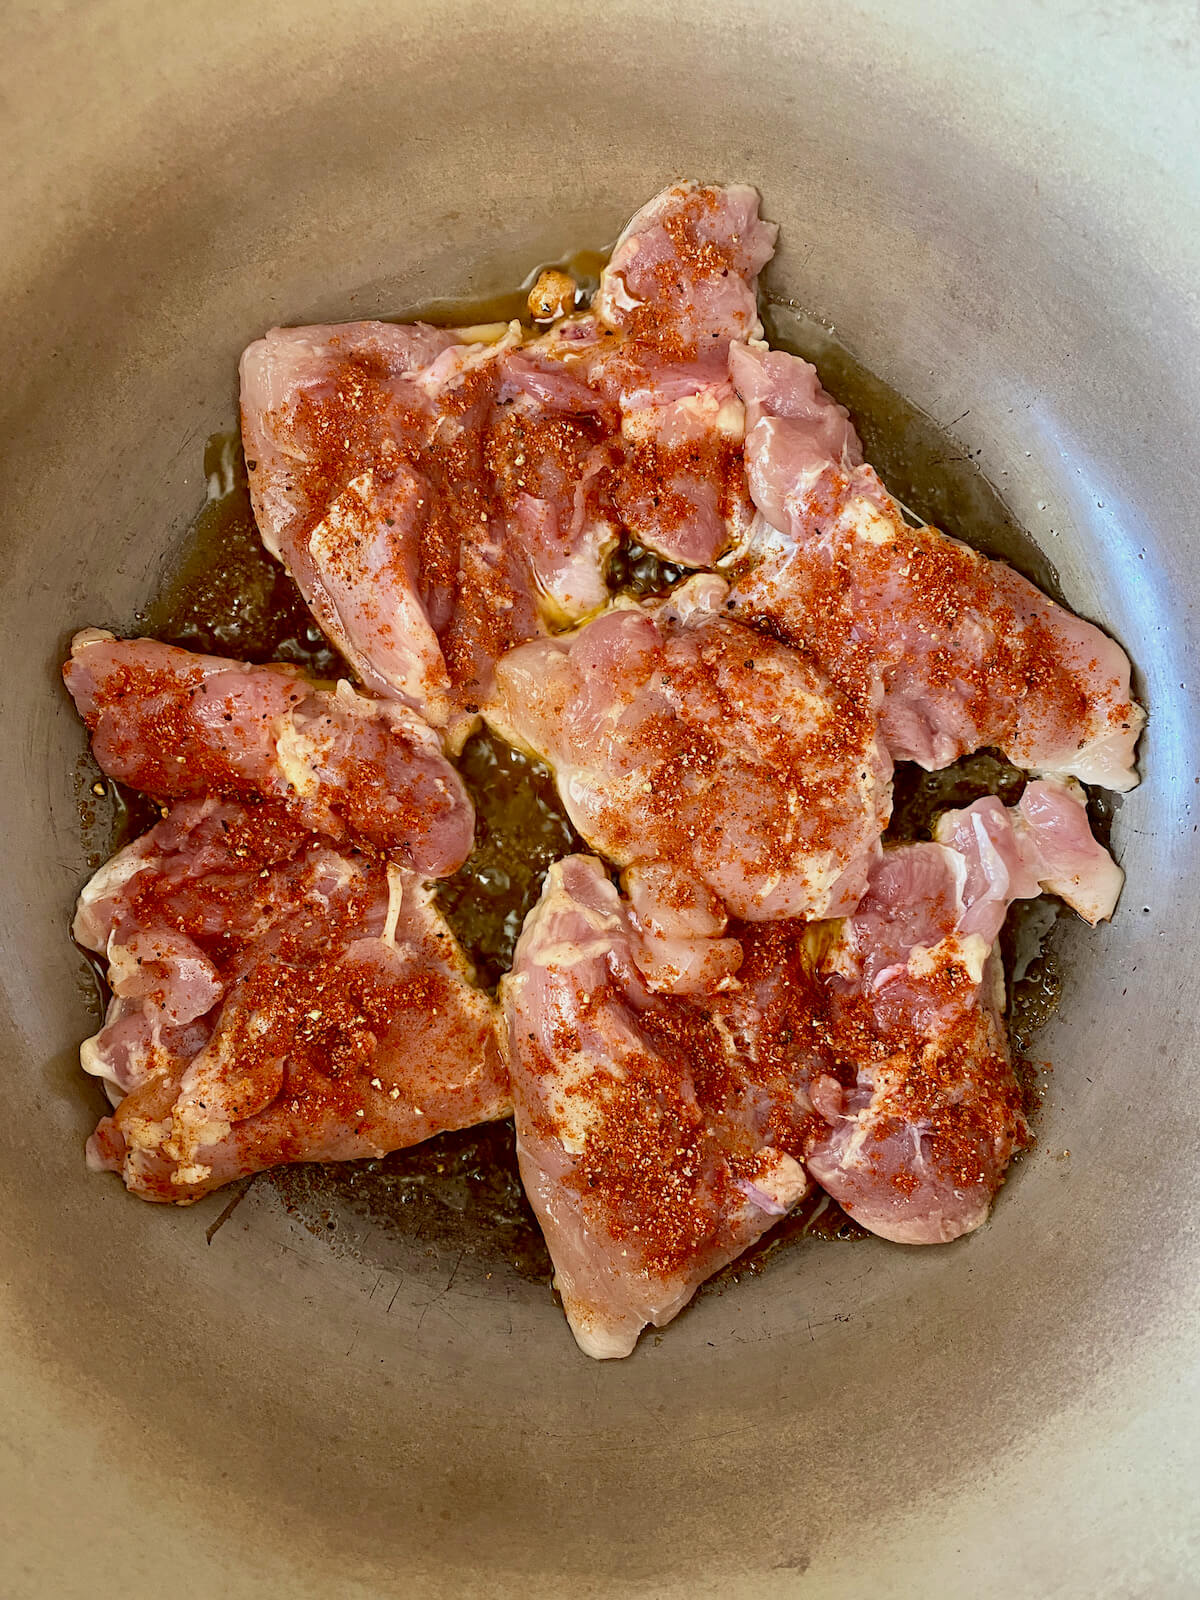 Seasoned chicken thighs searing in a cast iron pot.